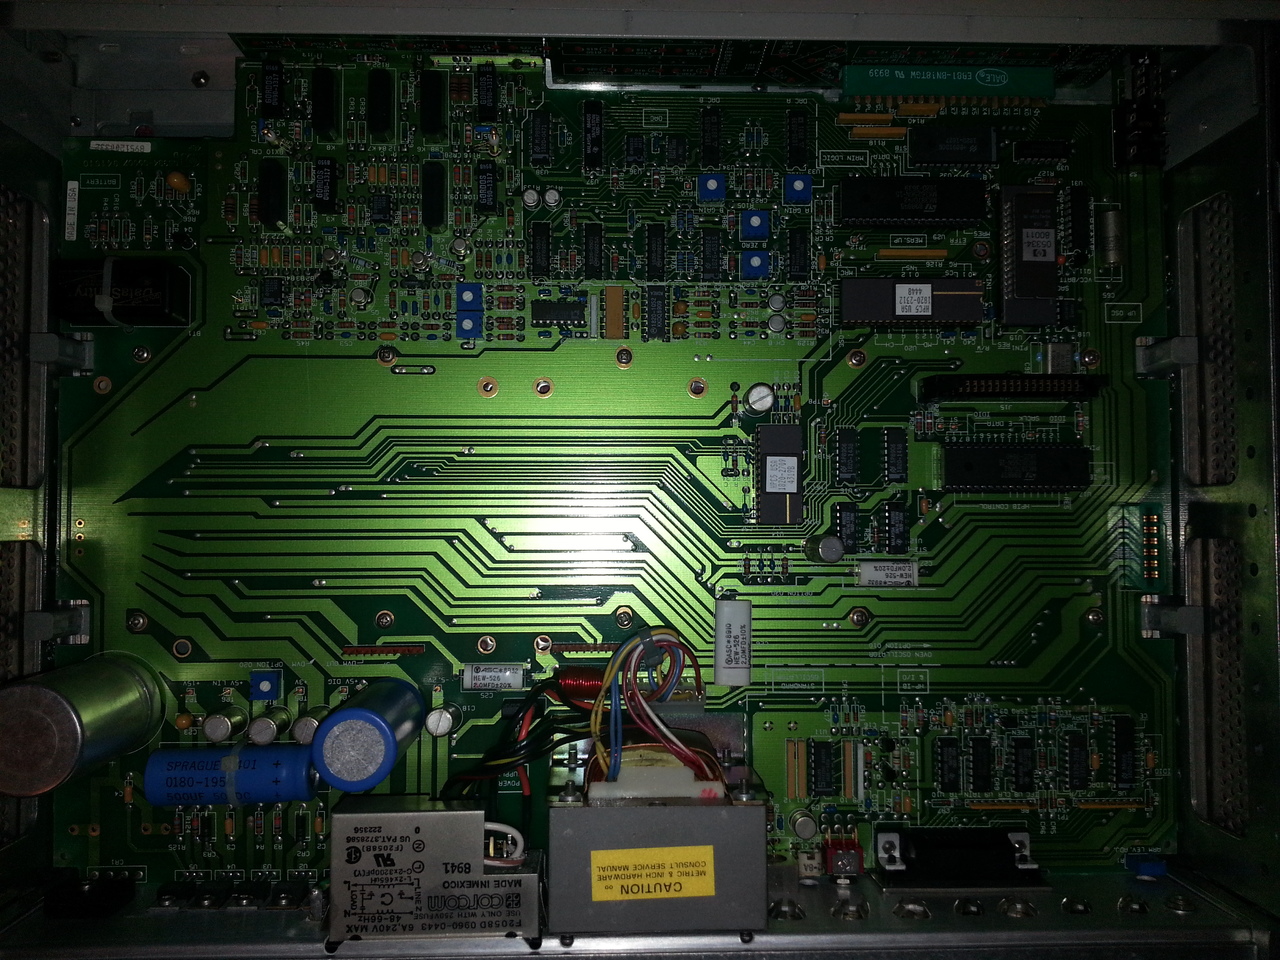 The top view of the PCB.